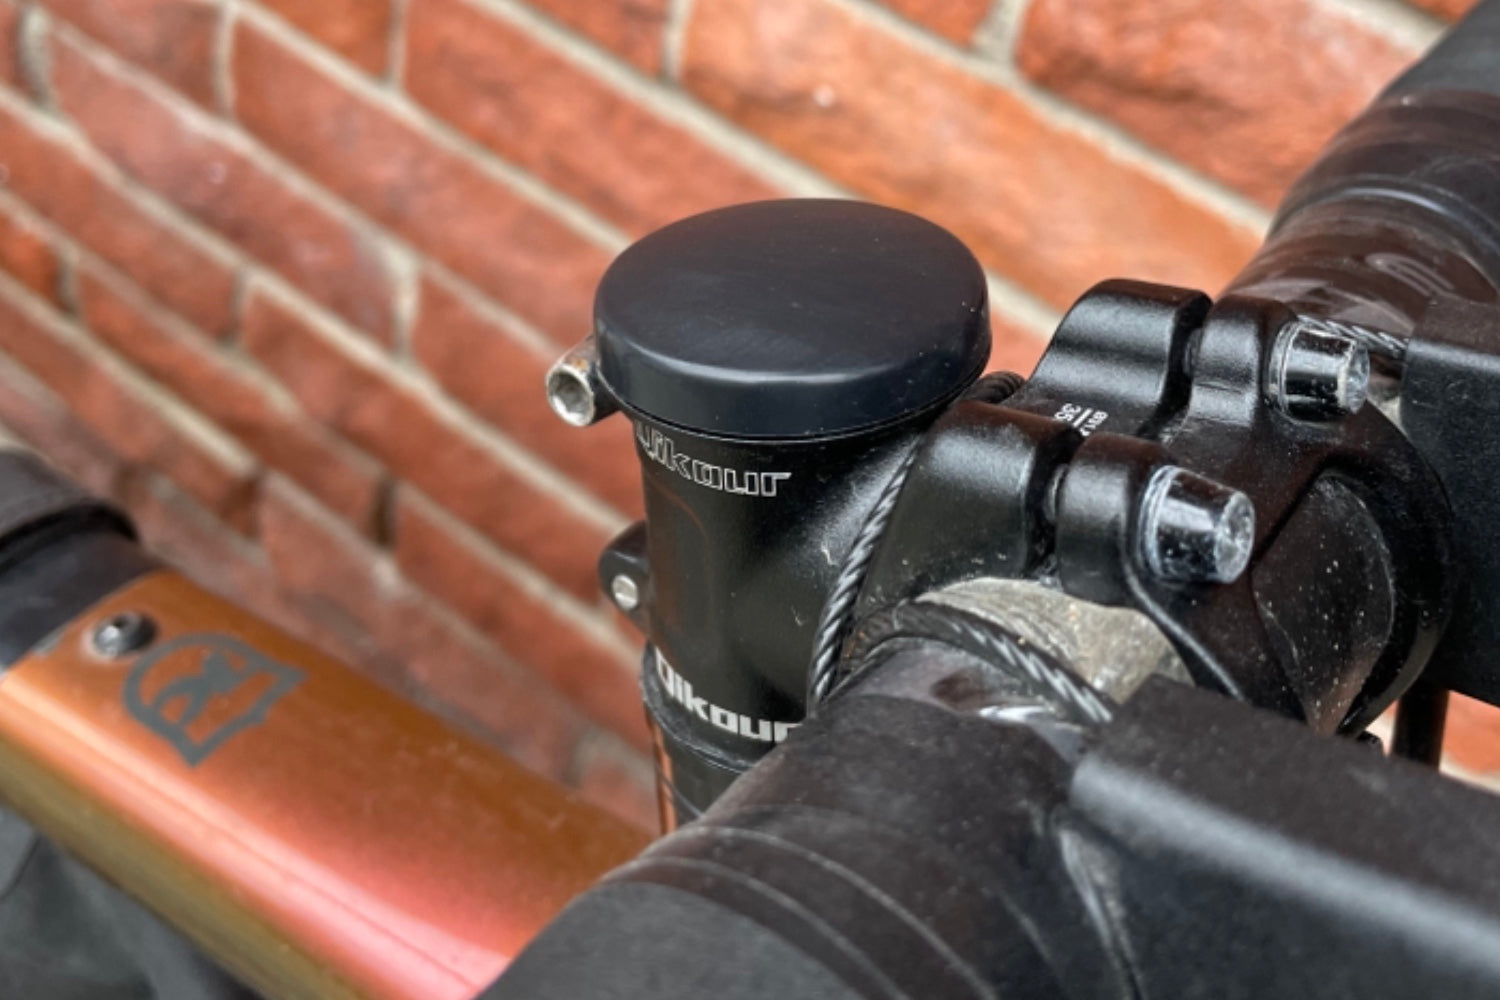 Stealth Cap is an Apple AirTag holder to protect bicycle against theft. If your bike goes missing you'll be able to see it's location. cycling bike tracking